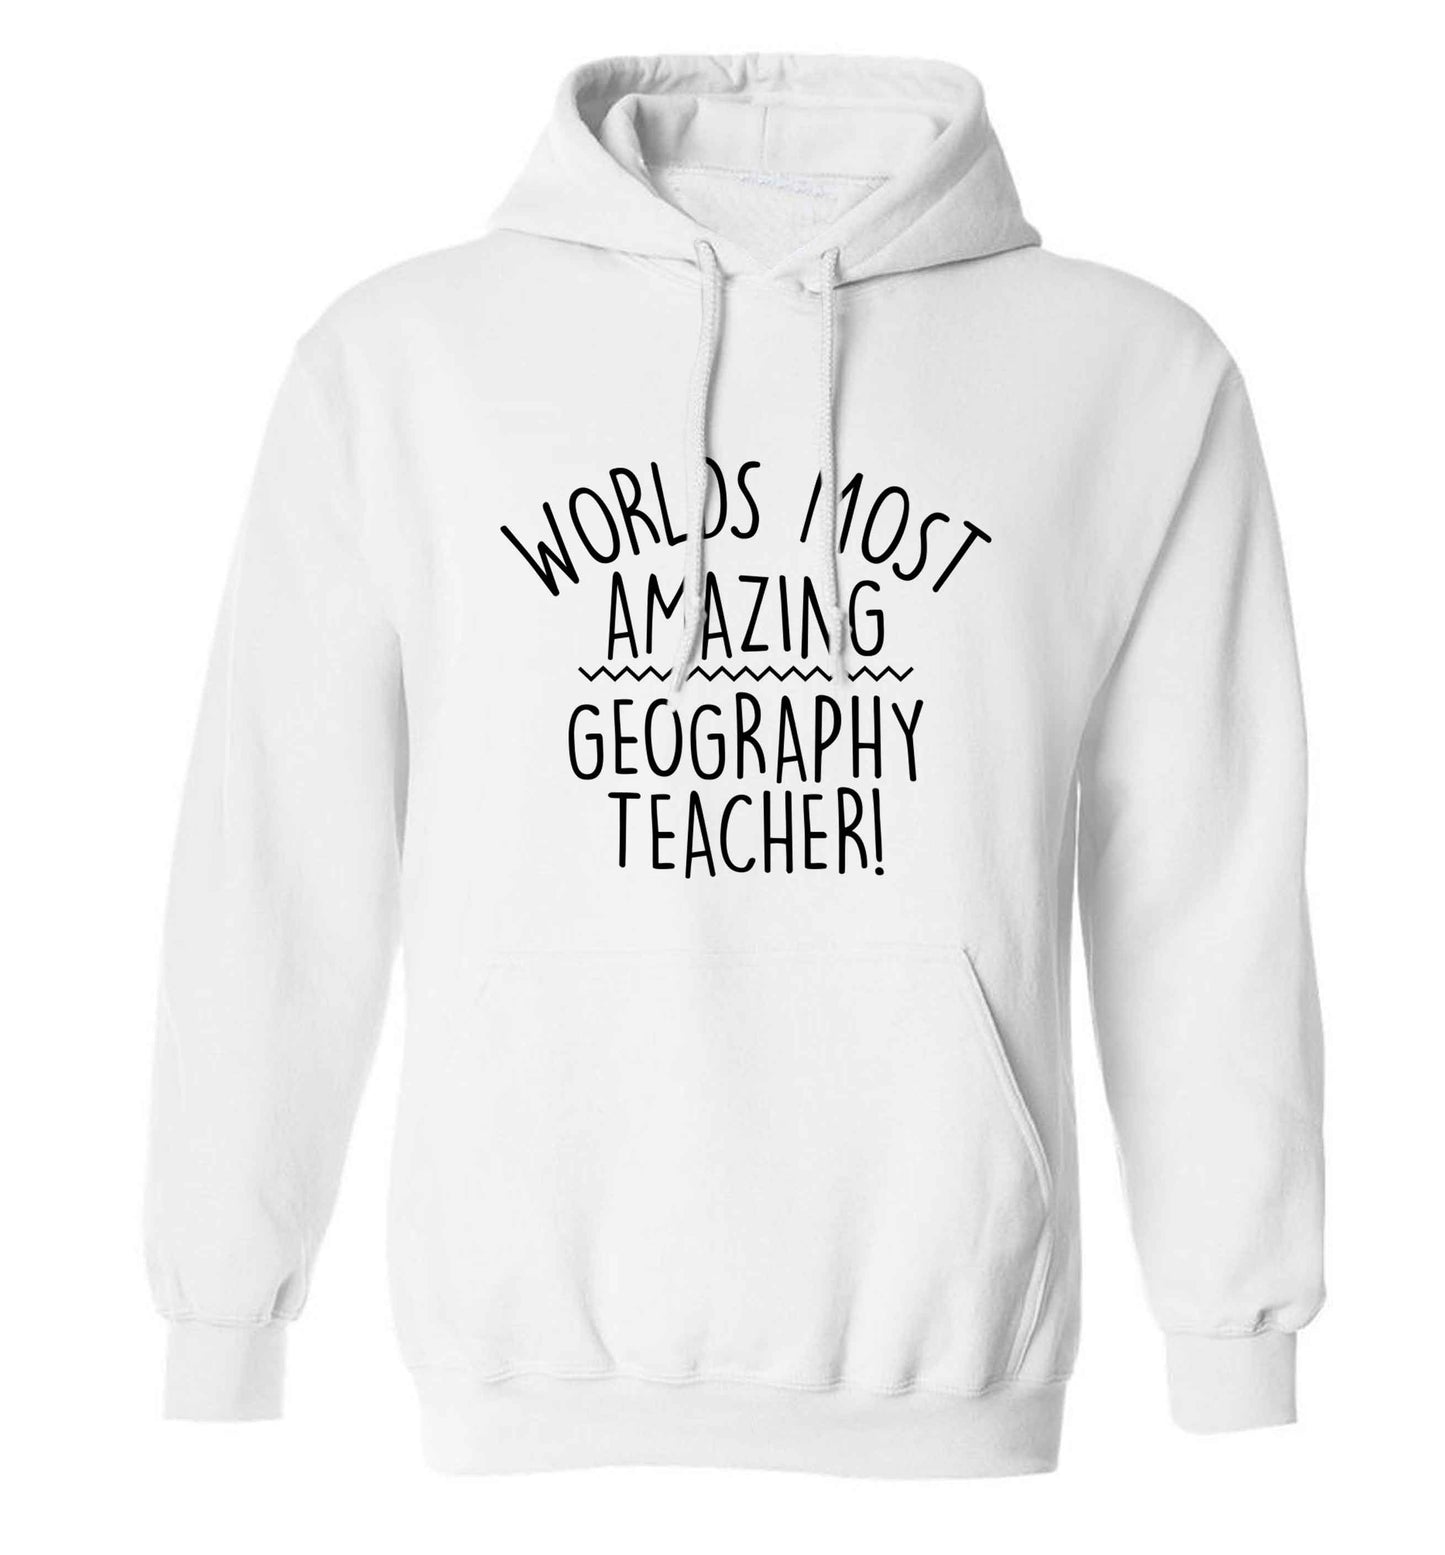 Worlds most amazing geography teacher adults unisex white hoodie 2XL